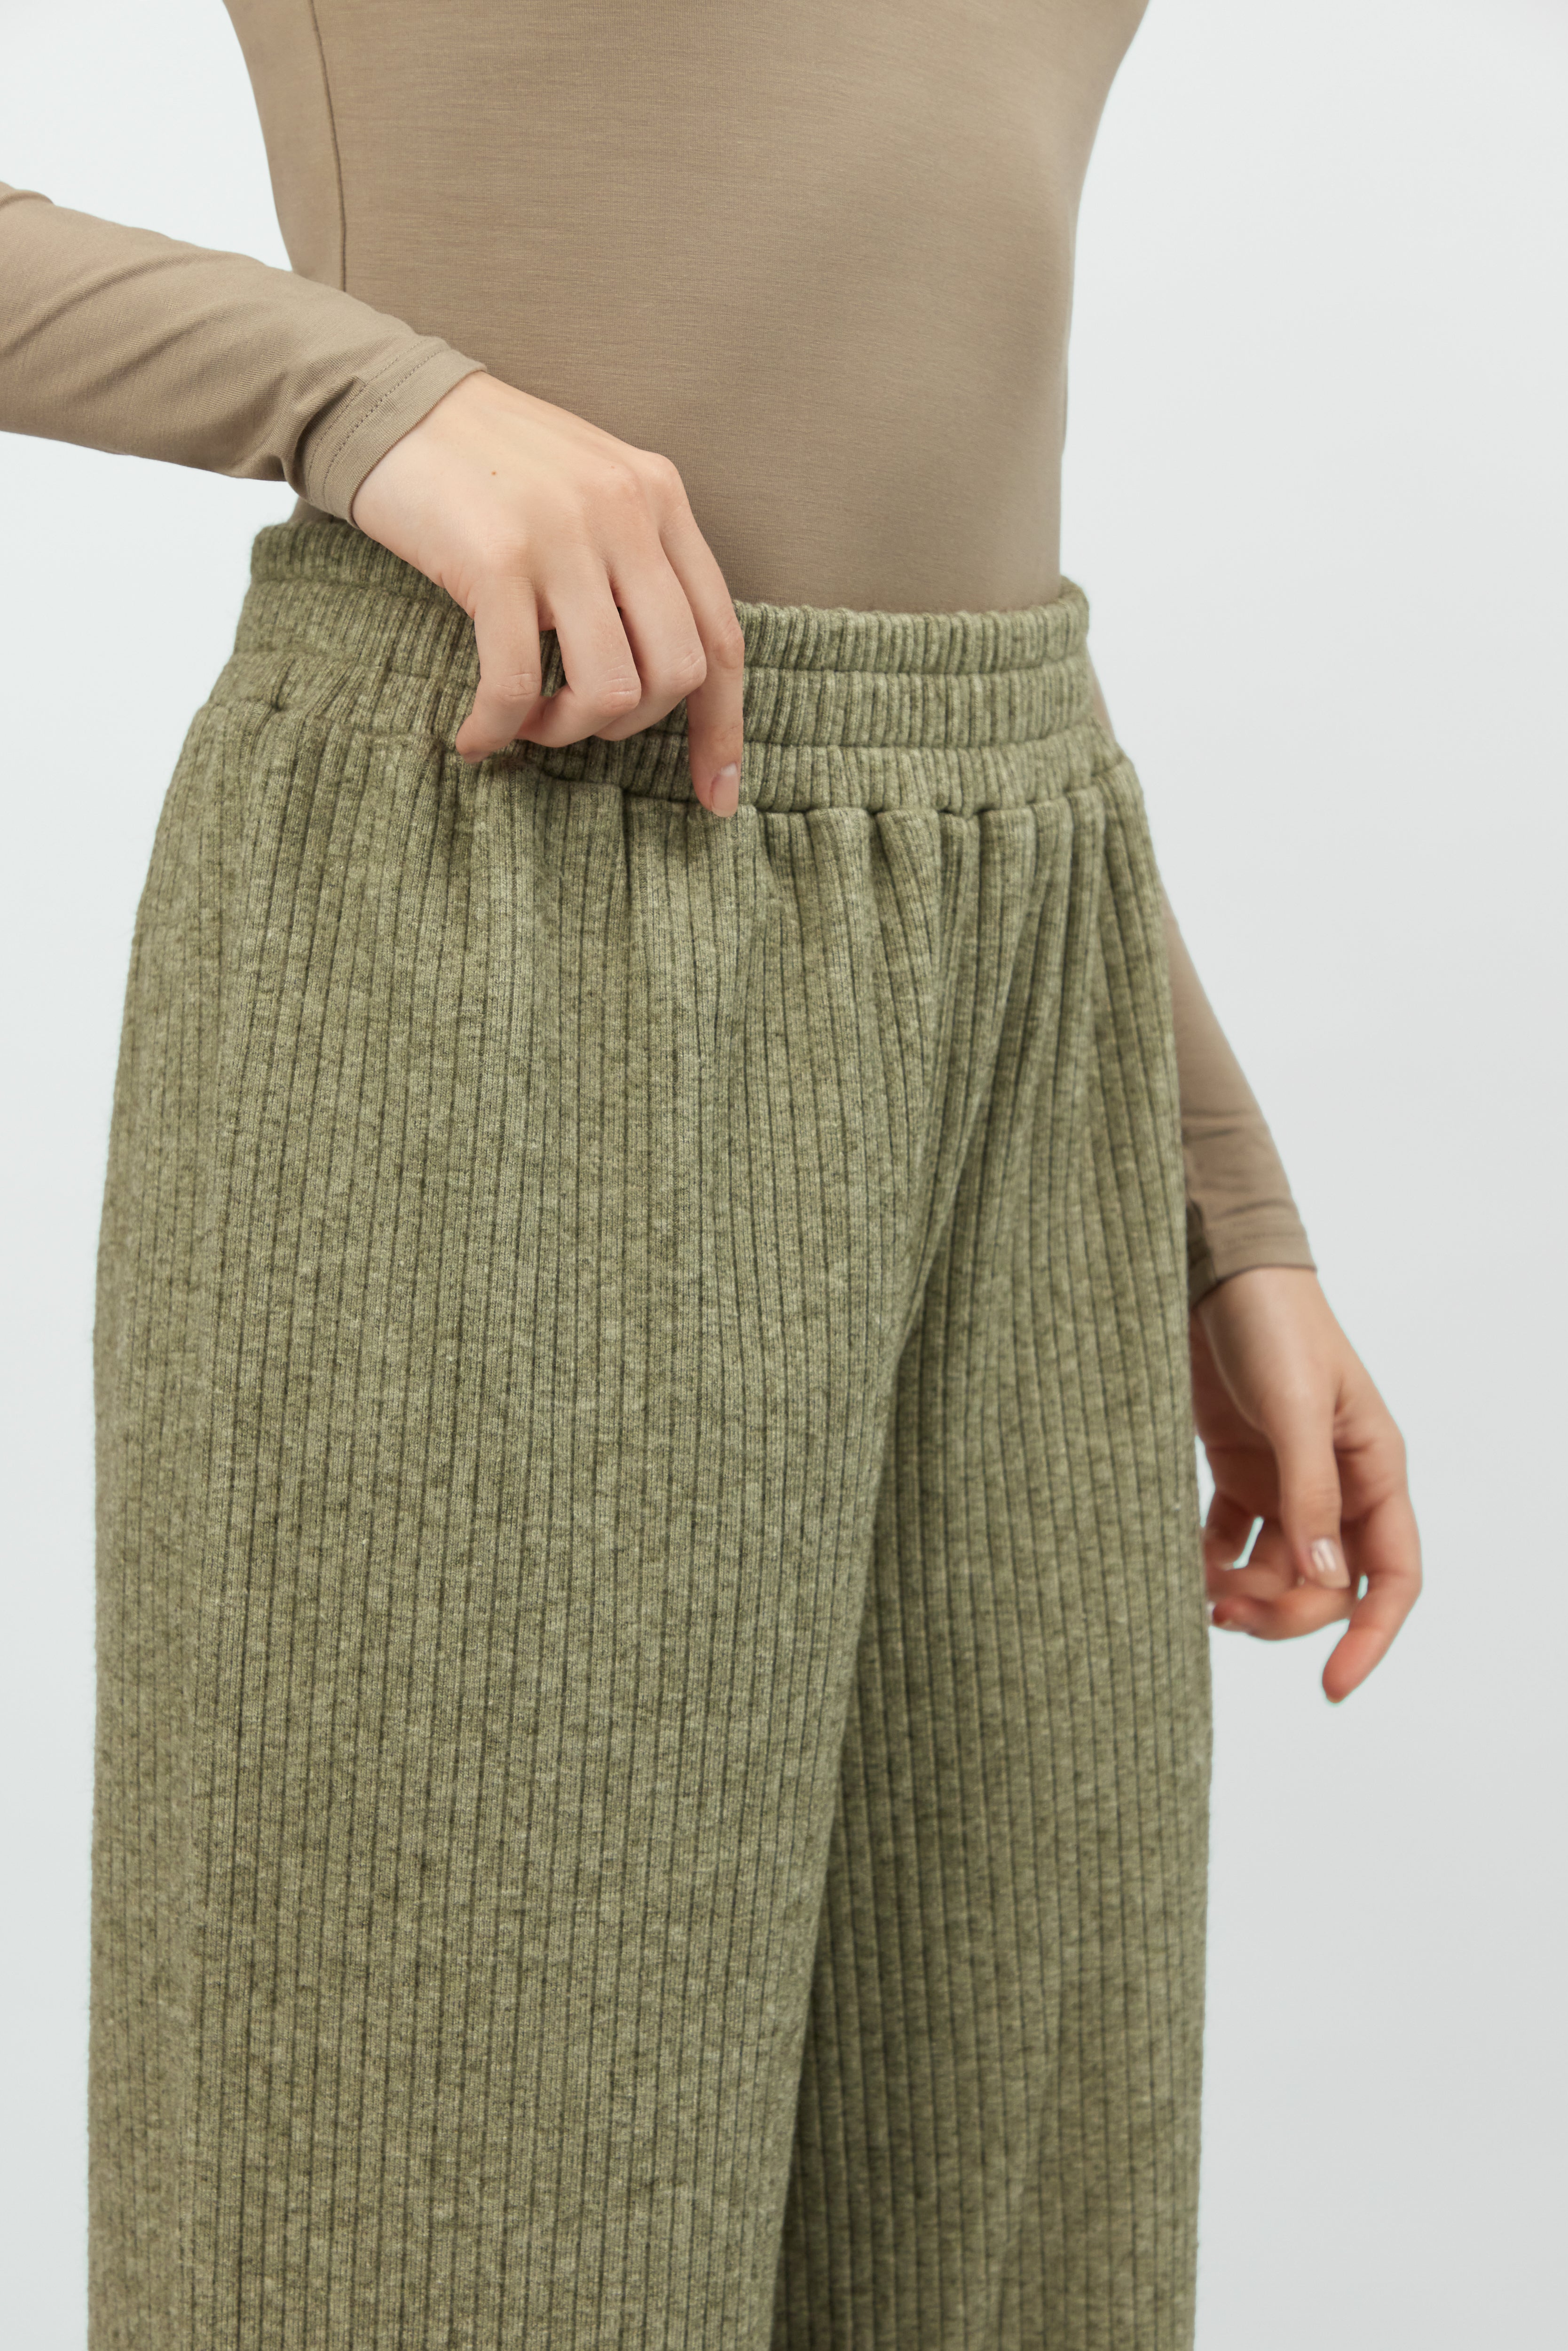 CA - Knit Relaxed Fit Pants - Olive